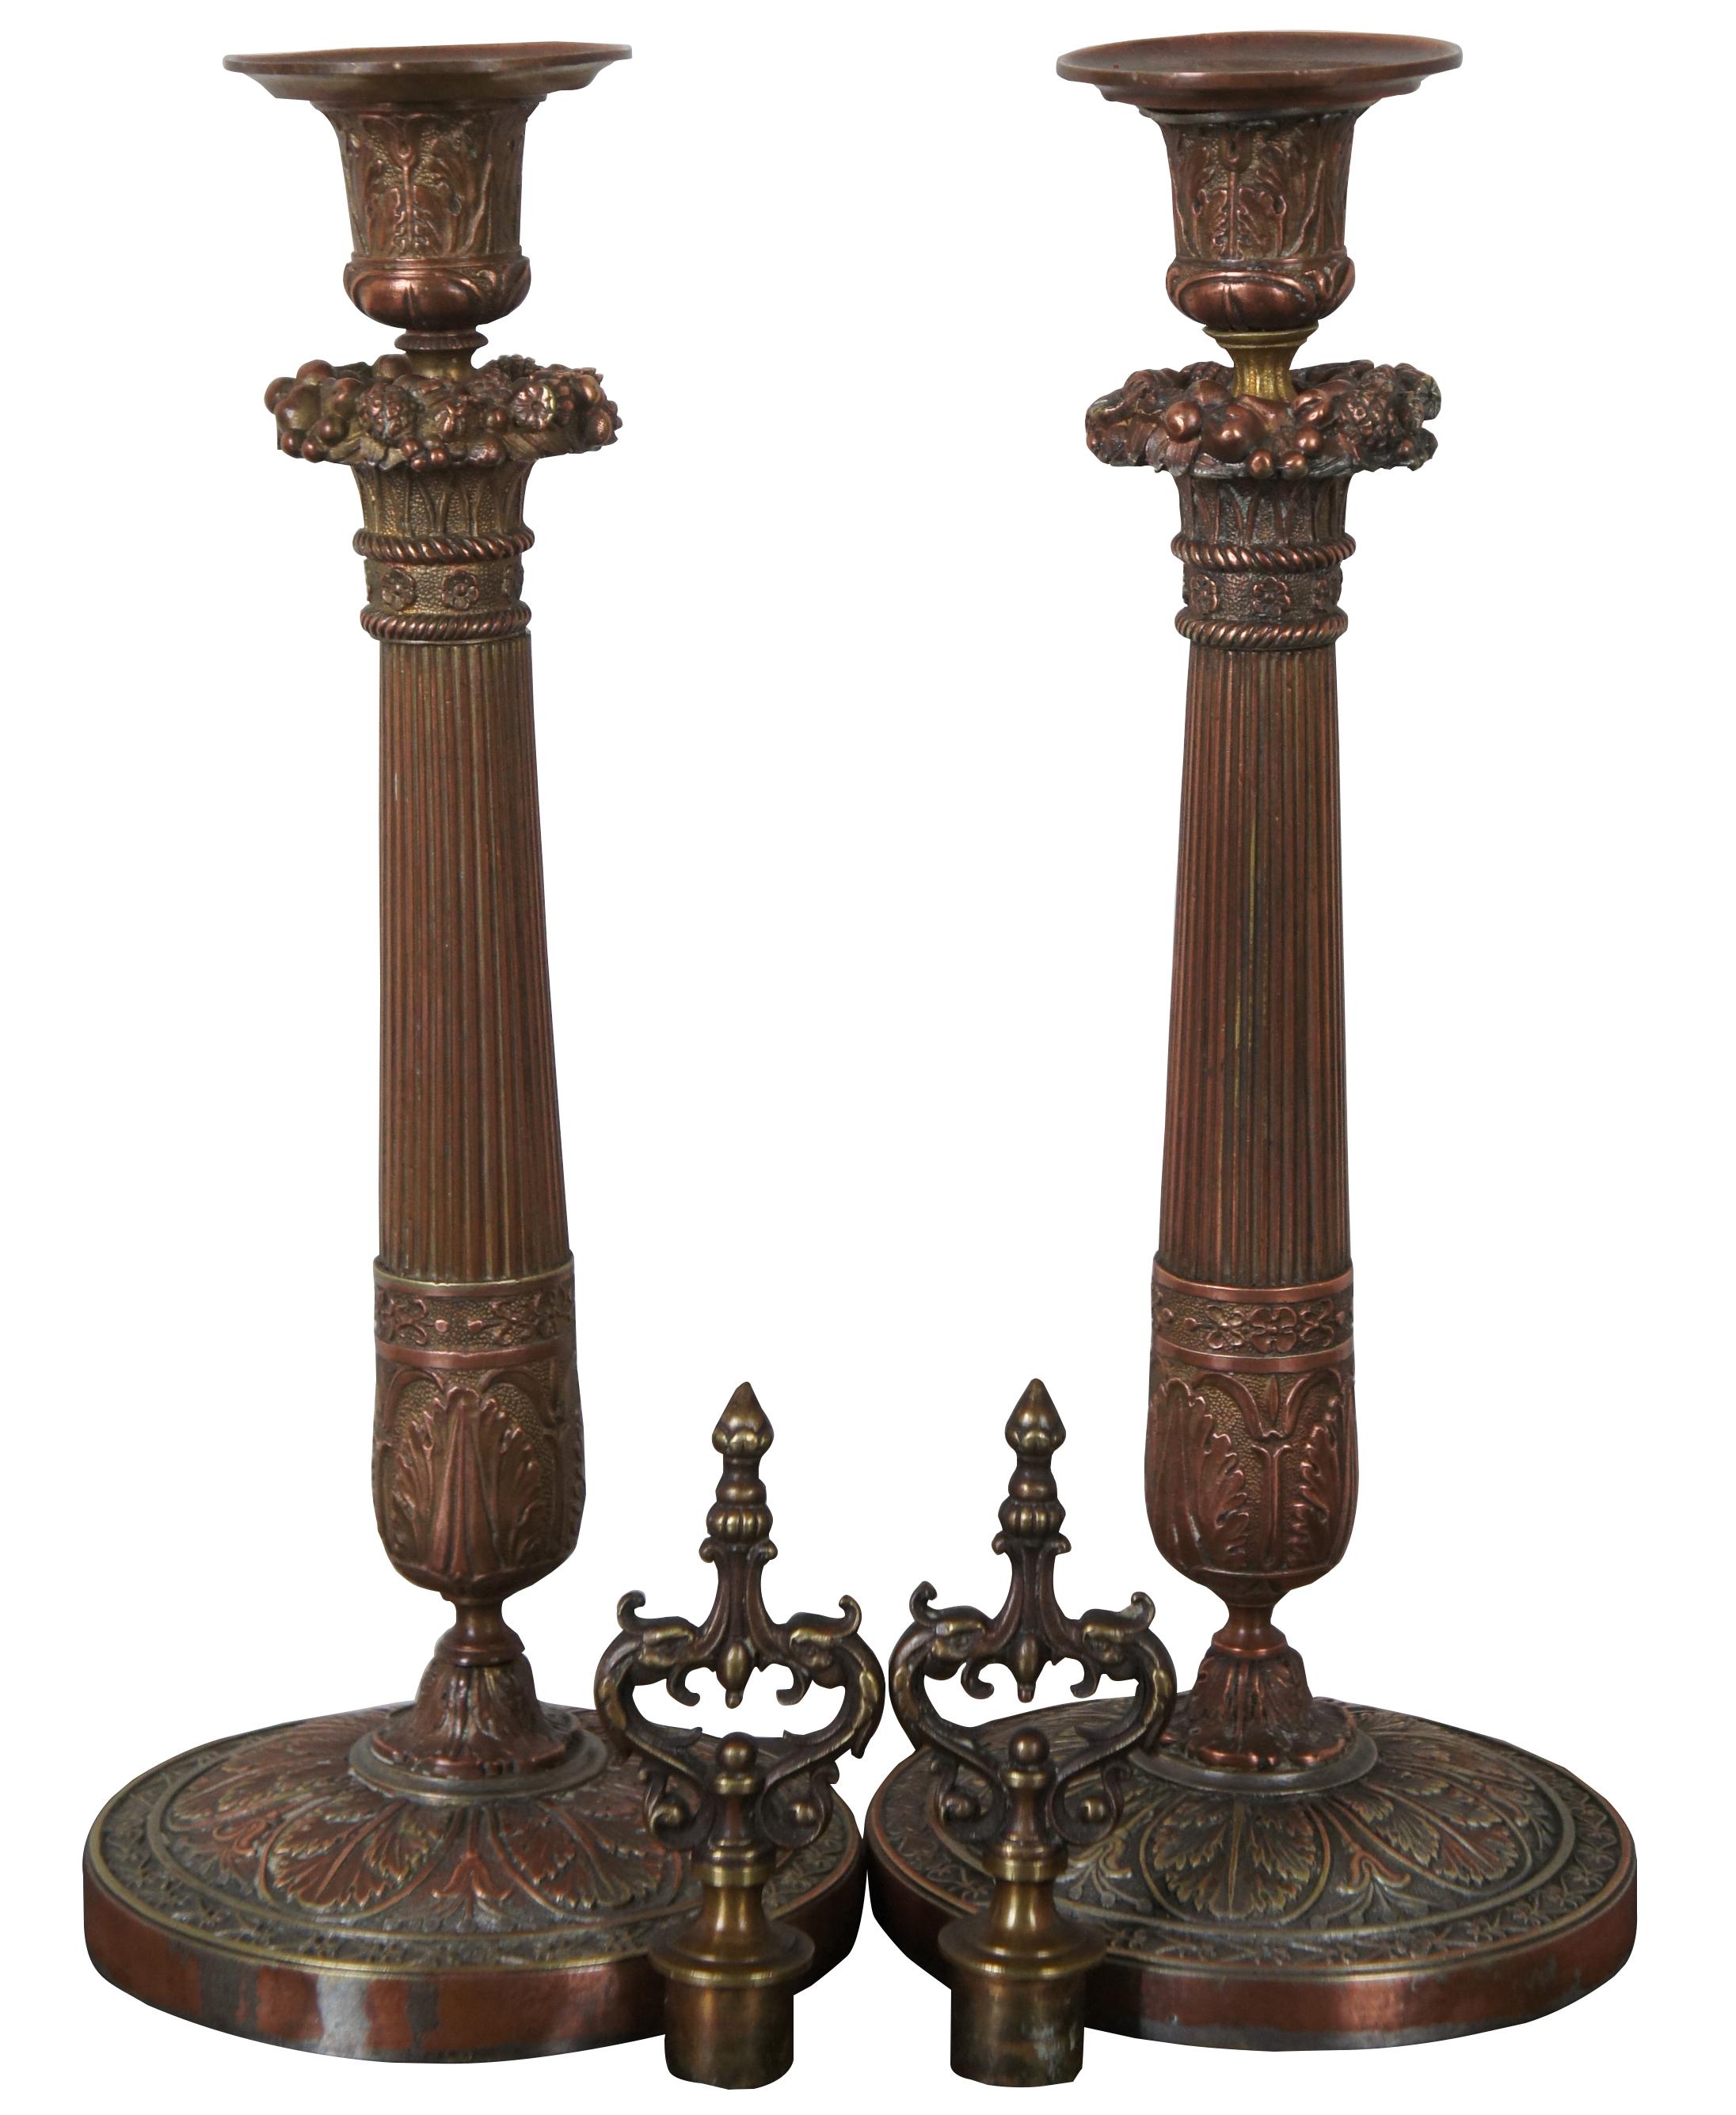 Pair of gilt bronze candlesticks in the manner of the French Restauration period, decorated with seeds, foliage and flowers on a round base ornamented with grape vines.

Measures: 13”, height with drip catcher 12.75”, height with finial 16.5”.